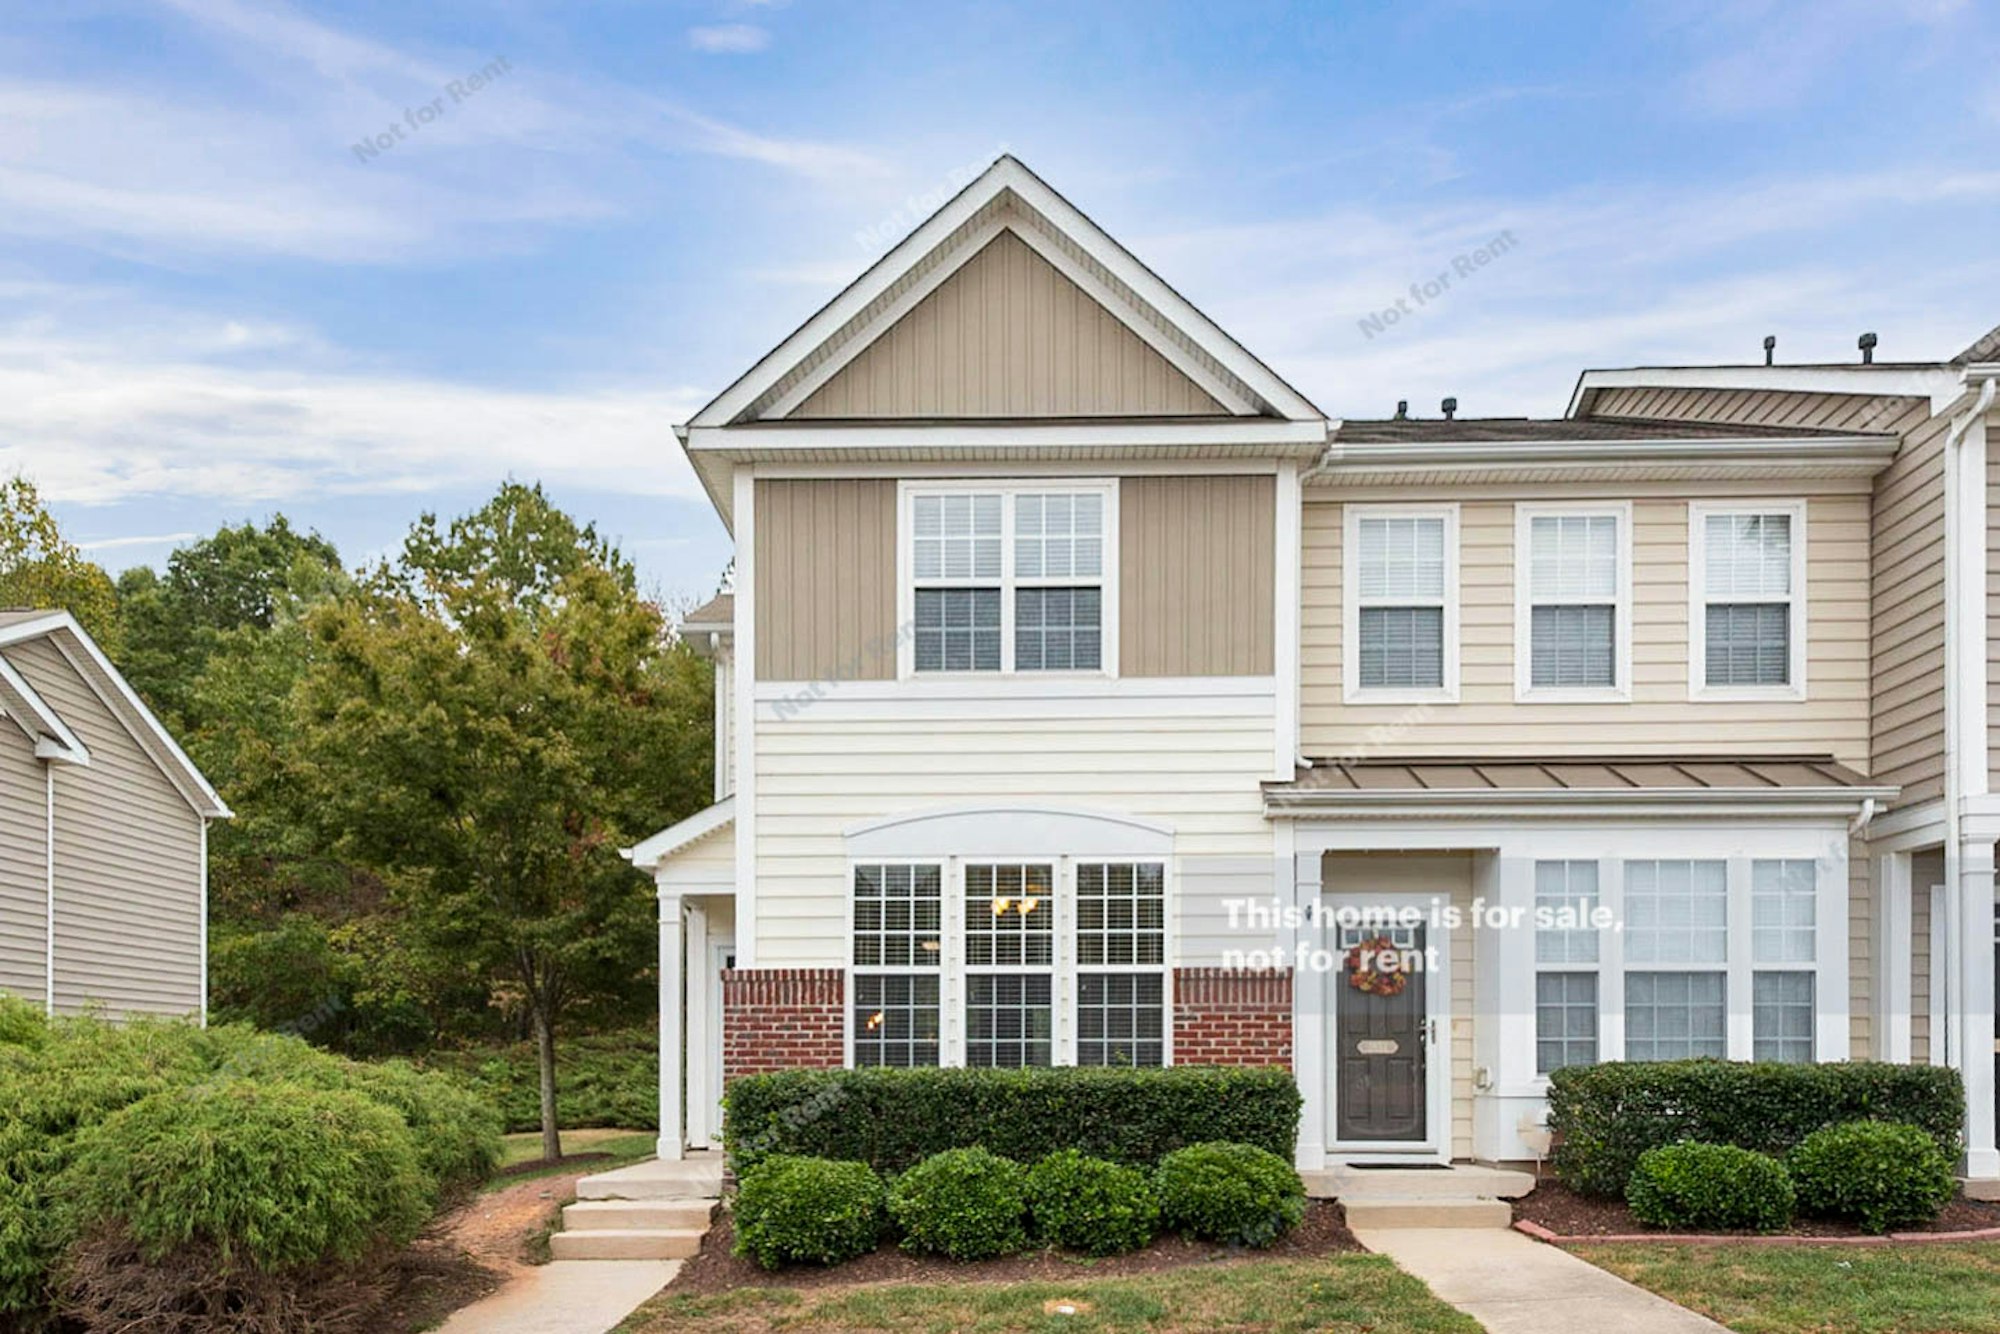 Photo 1 of 14 - 7631 Satinwing Ln, Raleigh, NC 27617